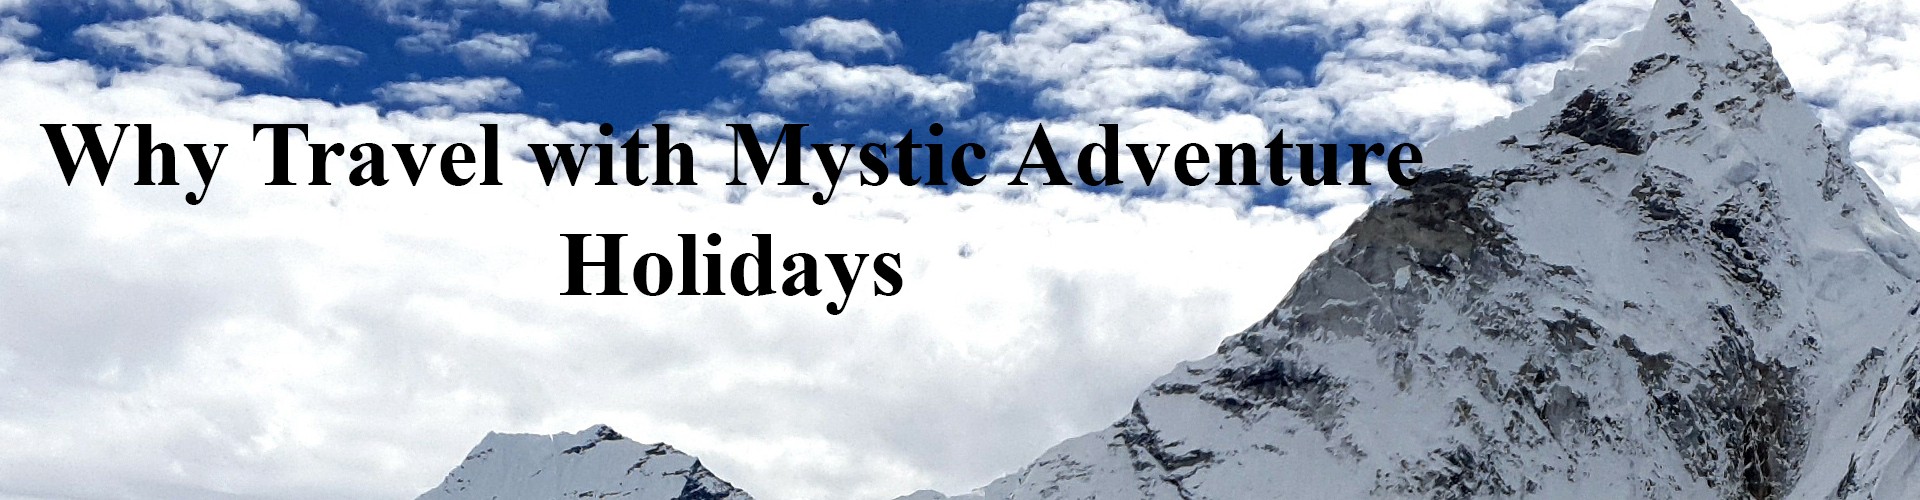 Why Travel with Mystic Adventure Holidays?